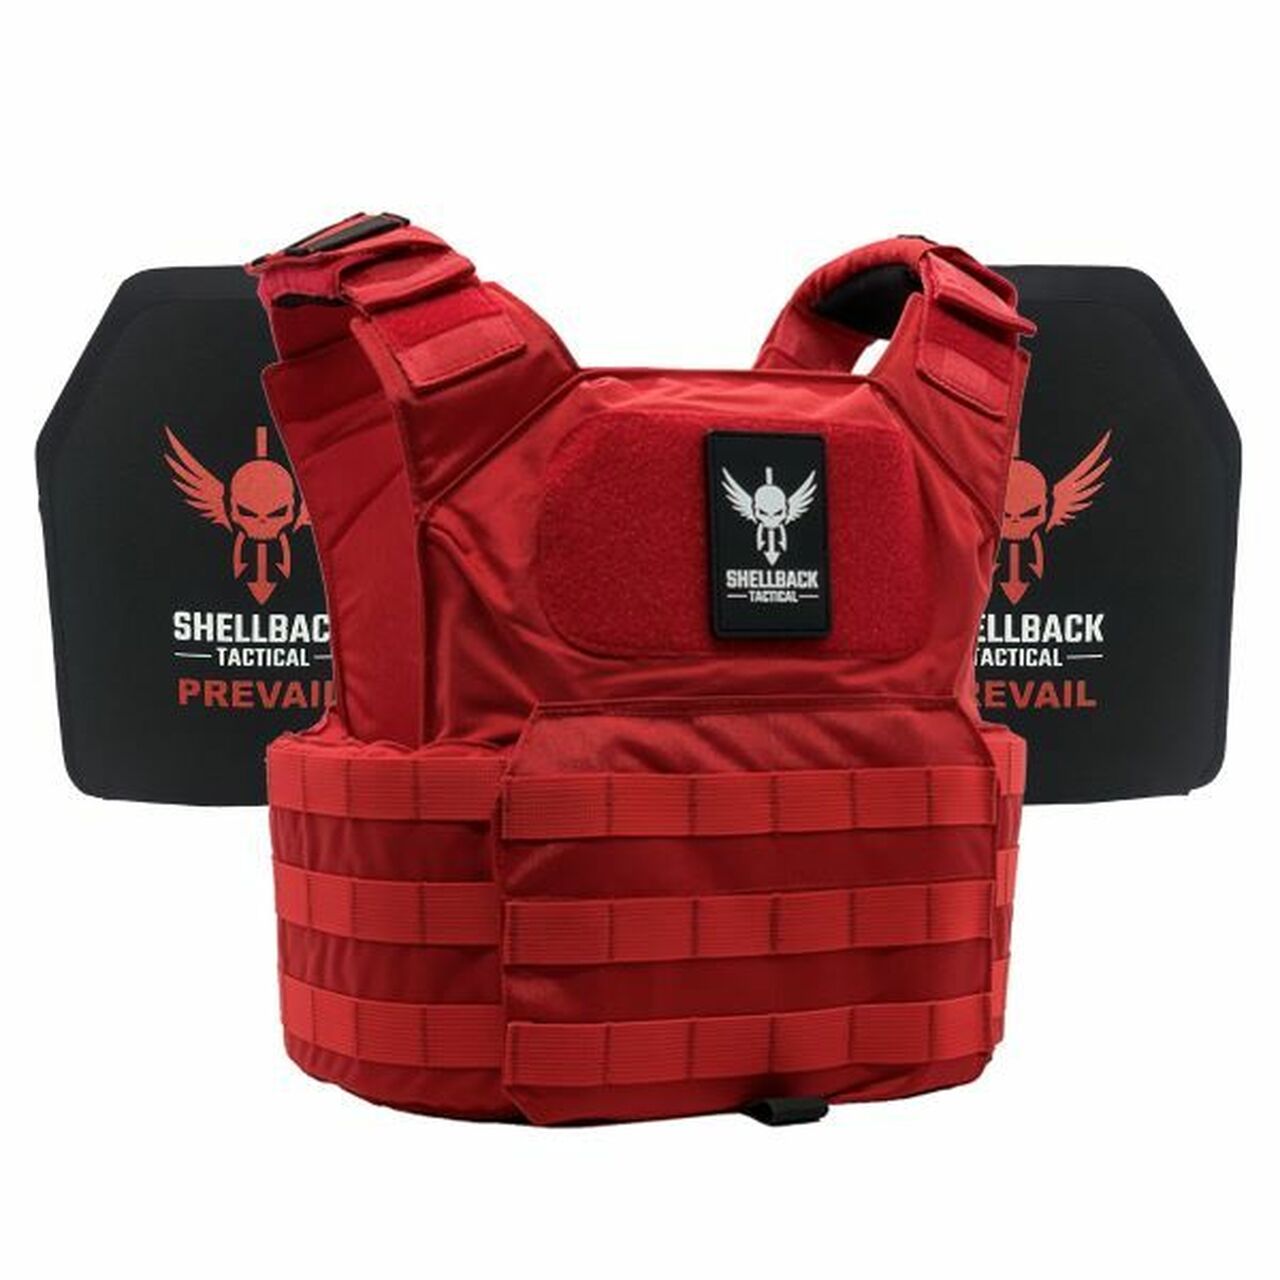 A Shellback Tactical Patriot Active Shooter Kit with Level IV Model 1155 Armor Plates Ranger Green body armor with a black logo on it.